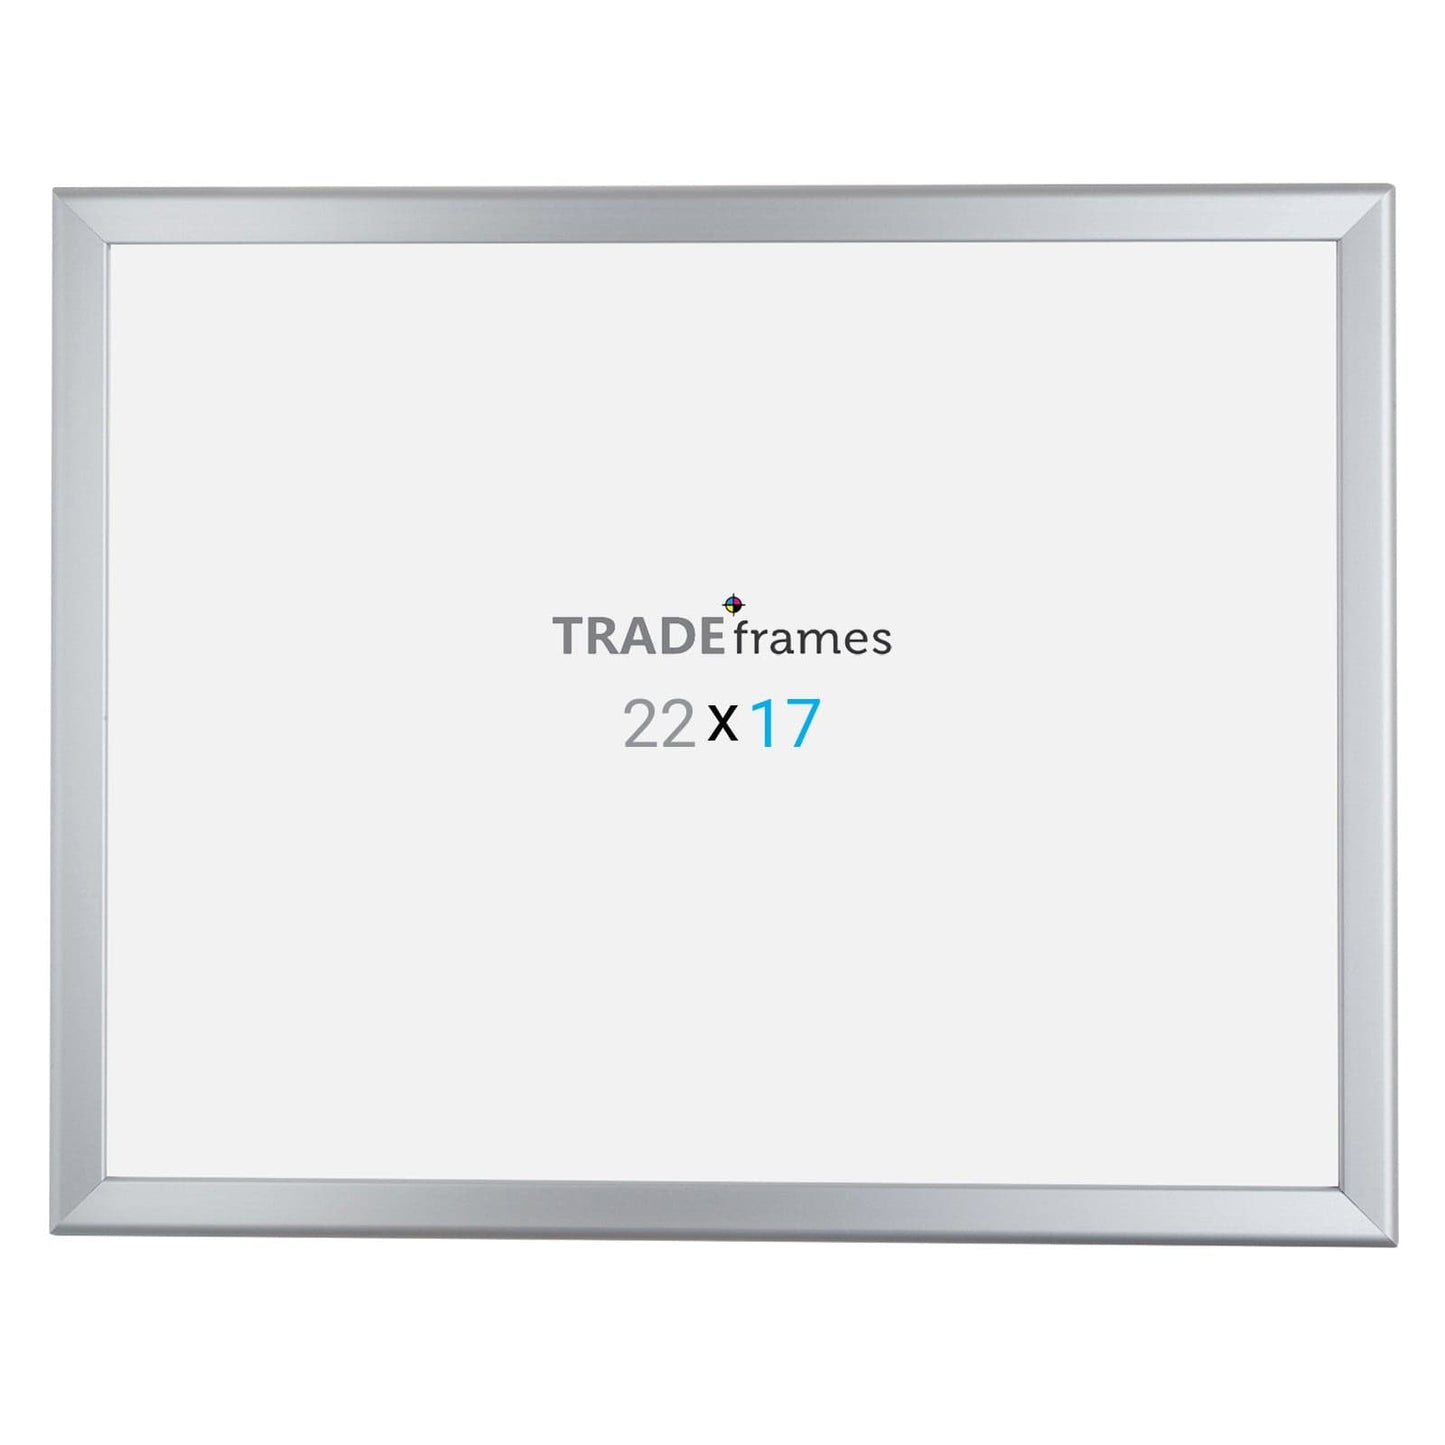 17x22 Silver Snap Frame 17x22 - 1.25 inch profile - Snap Frames Direct